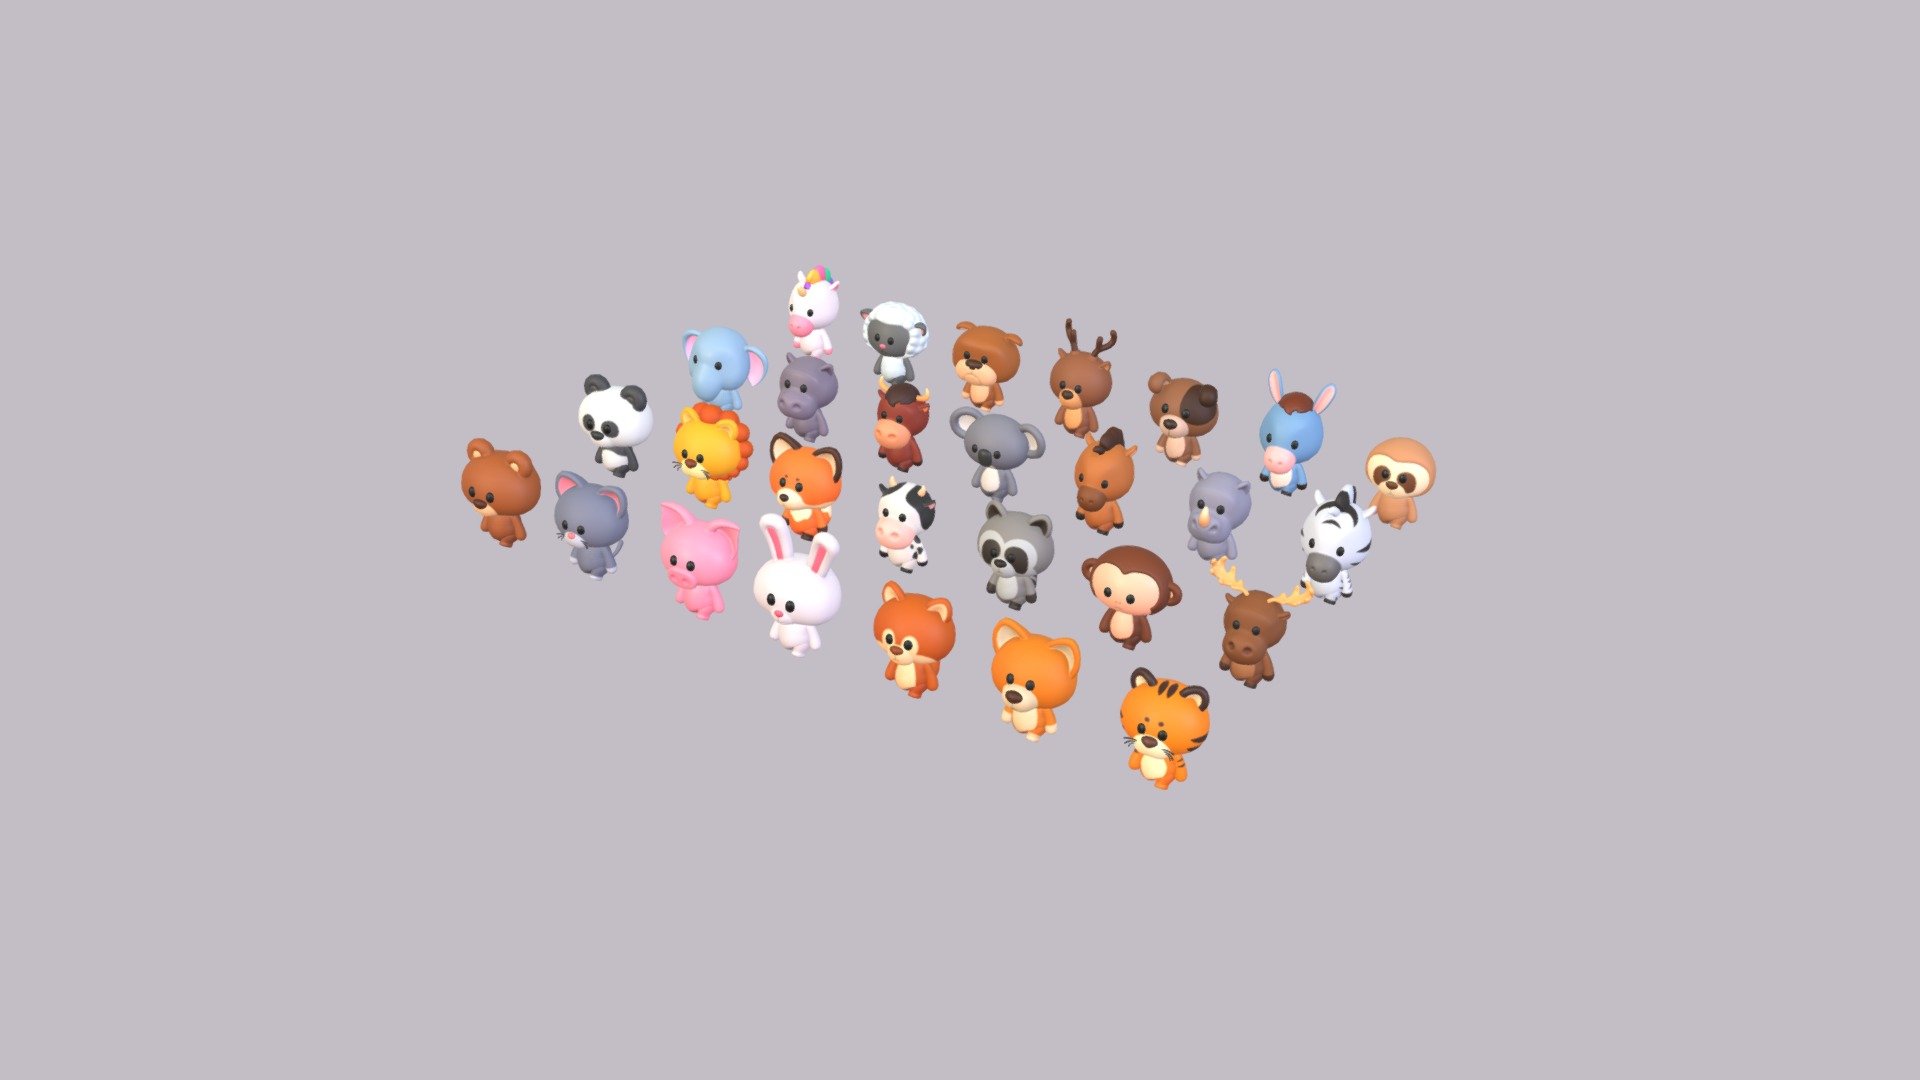 Rigged Cartoon Animal Character Pack 3d model.      
    


28 Rigged Animal  

- Bear  

- Cat  

- Pig  

- Rabbit  

- Squirrel  

- Dog  

- Tiger  

- Panda  

- Lion  

- Fox  

- Cow  

- Raccoon  

- Monkey  

- Moose  

- Elephant 

- Hippopotamus  

- Bull  

- Koala  

- Horse  

- Rhinoceros 

- Zebra  

- Unicorn  

- Sheep  

- Bulldog  

- Reindeer  

- Jack Russell Dog  

- Donkey  

- Sloth  


File Format      
 
- 3ds max 2023  
 
- FBX  
 


Clean topology    

Rigged with CAT in 3ds Max                         

Non-overlapping unwrapped UVs        
 


PNG texture               

2048x2048                


- Base Color                        

- Normal                            

- Roughness                         

 - Pack007  Rigged Cartoon Animal Pack1 - Buy Royalty Free 3D model by BaluCG 3d model